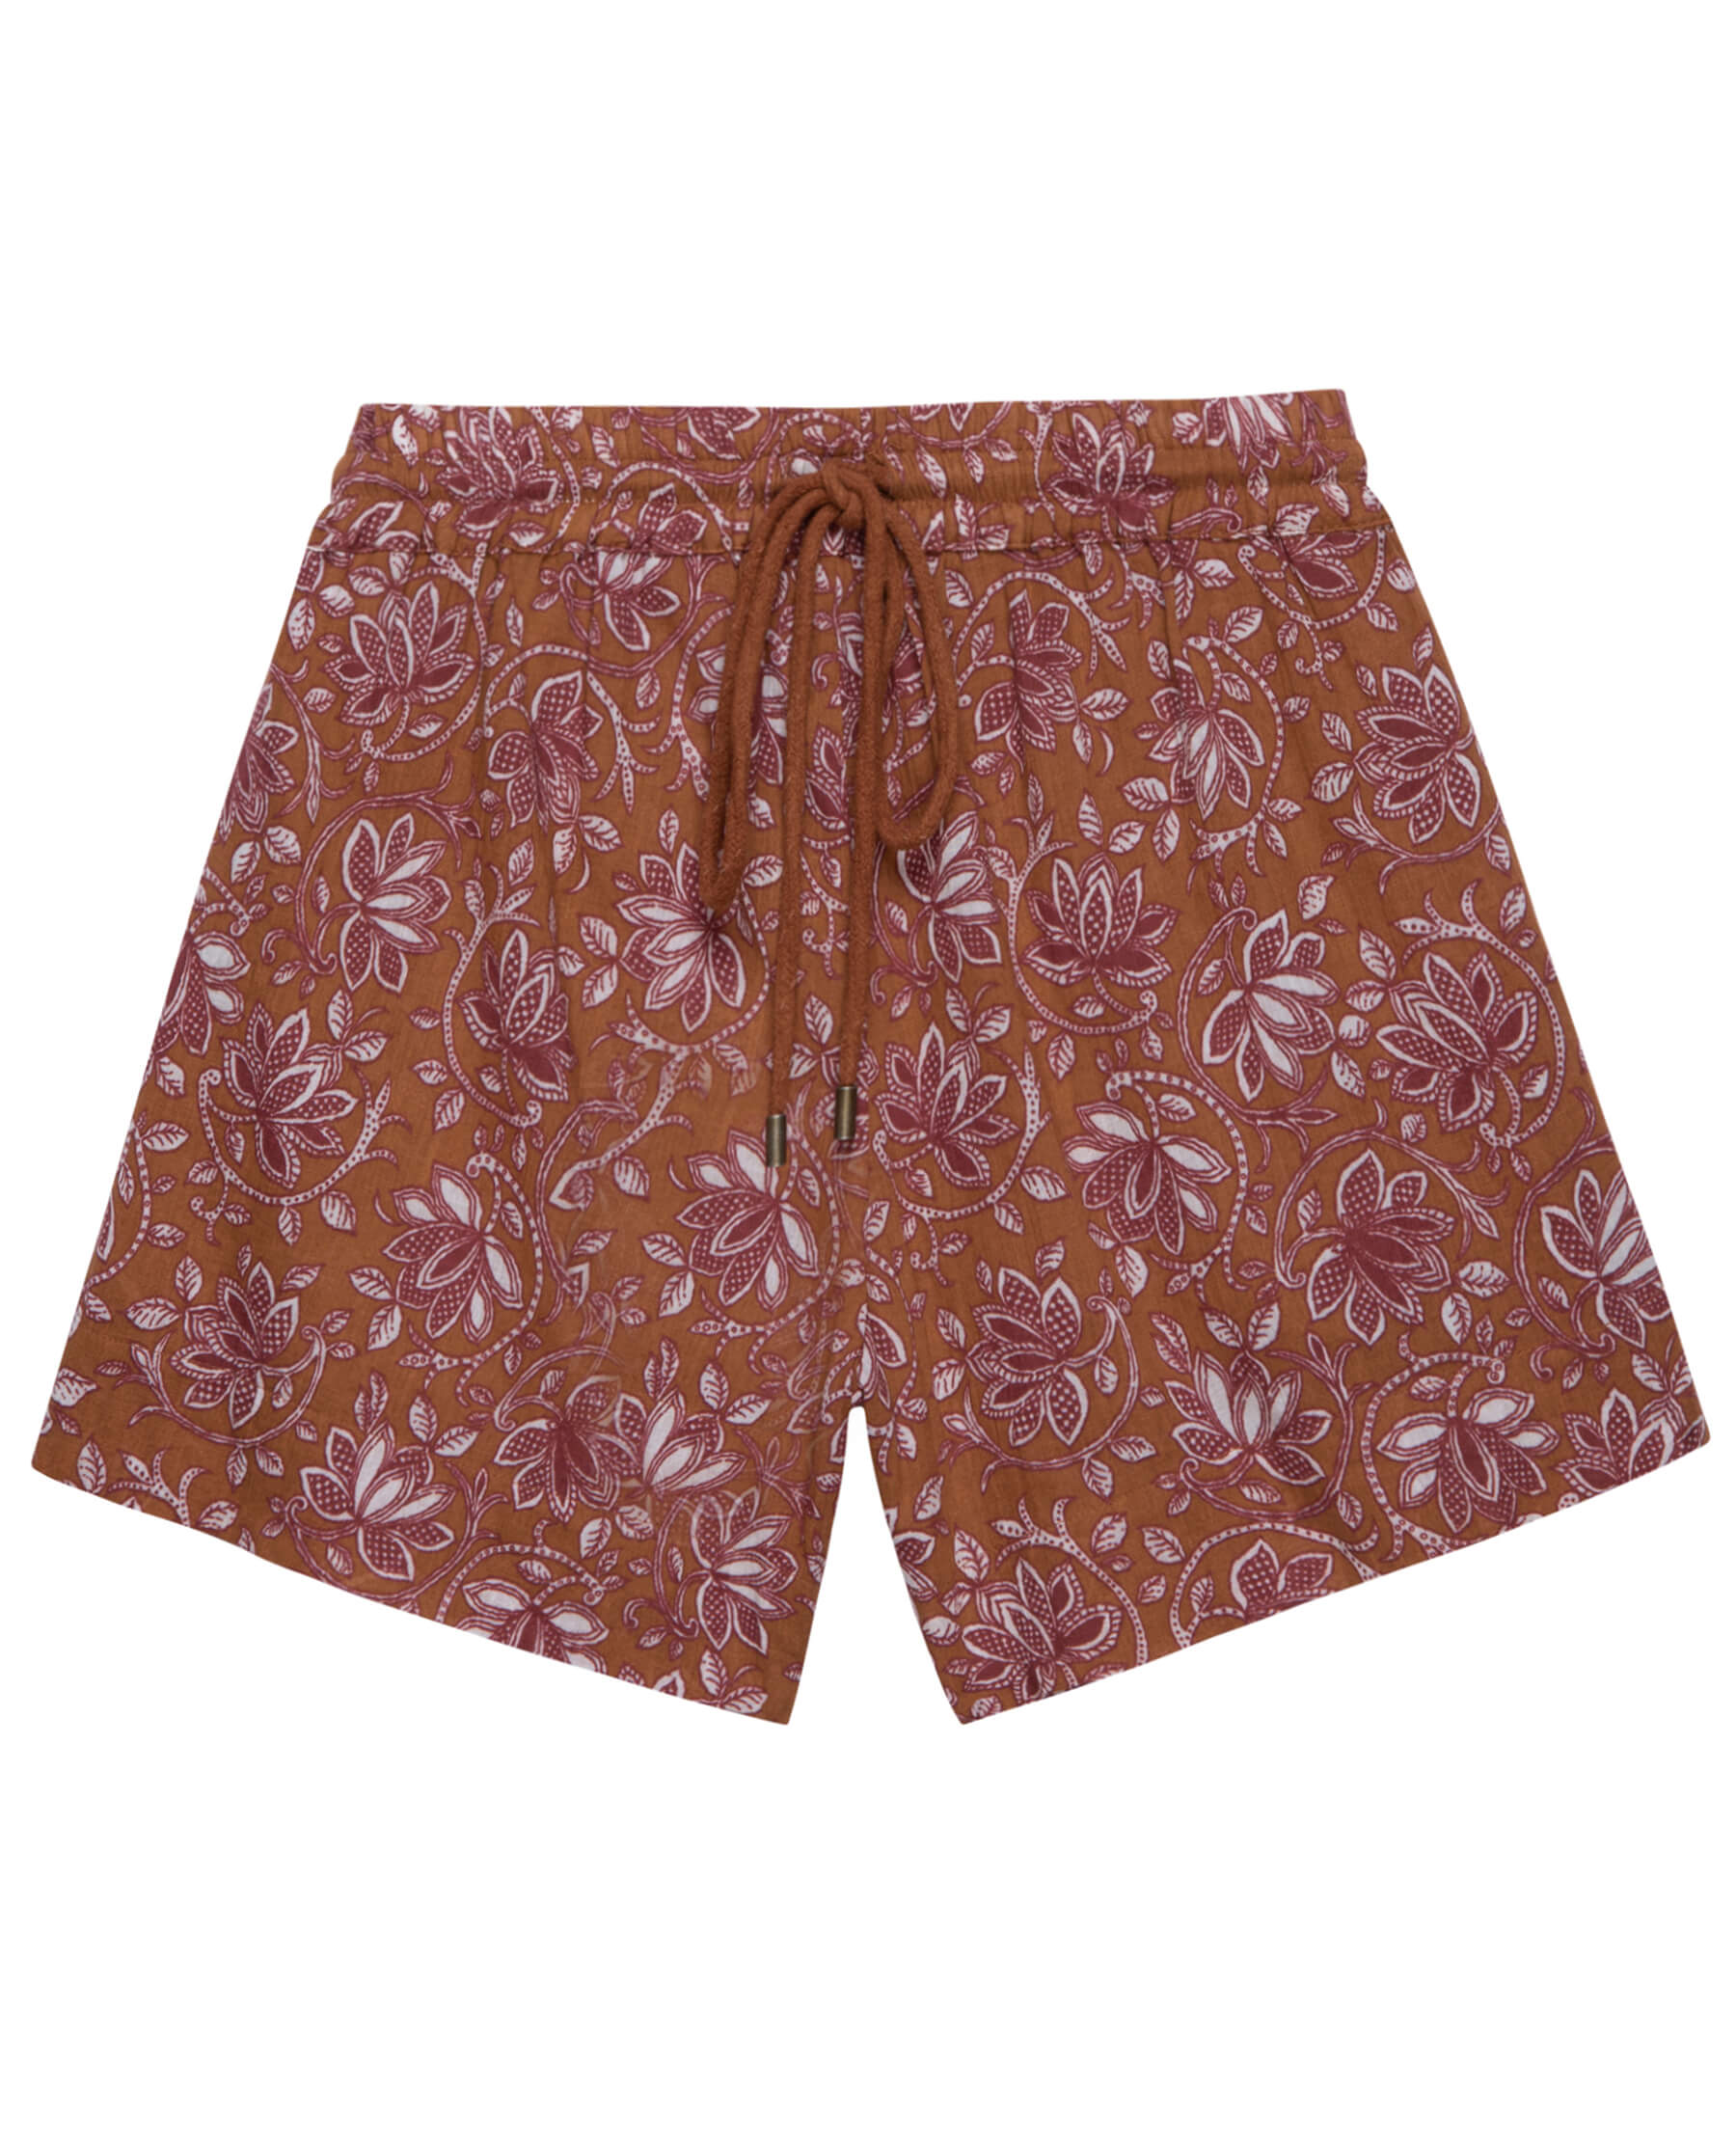 The Delta Short. -- Golden Sand Oasis Floral COVER-UP SHORTS THE GREAT. SP24 SWIM